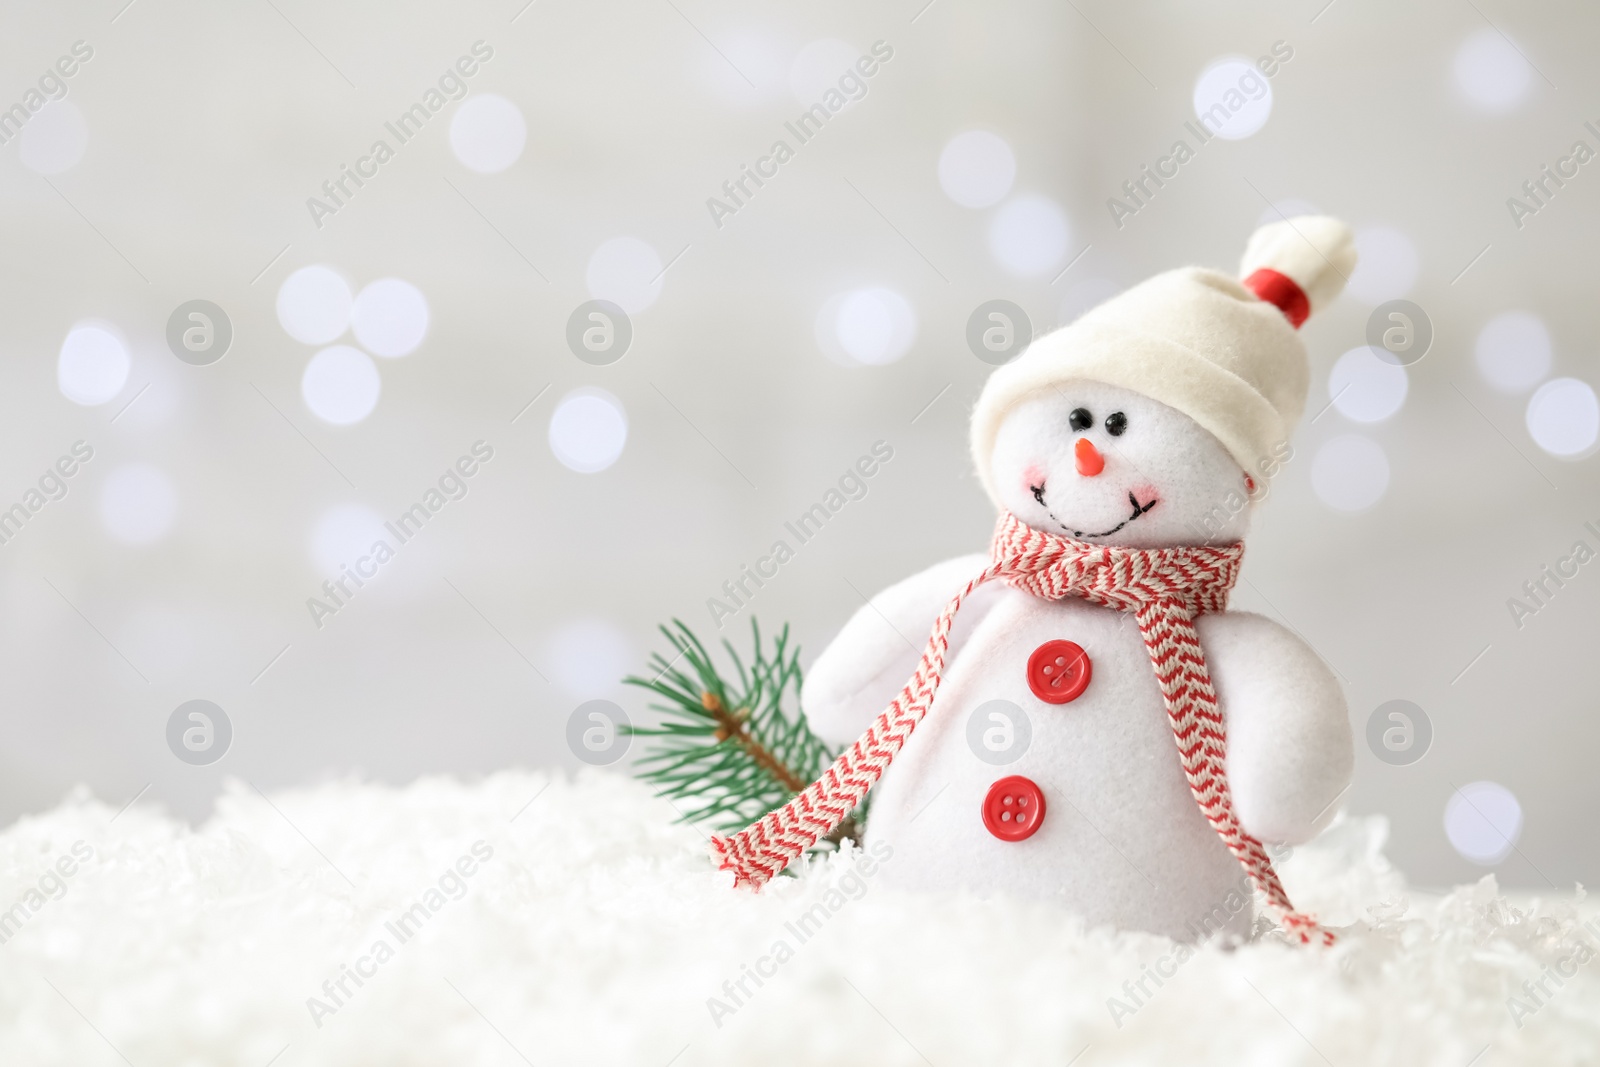 Photo of Snowman toy and branch of fir tree on snow against blurred festive lights, space for text. Christmas decoration